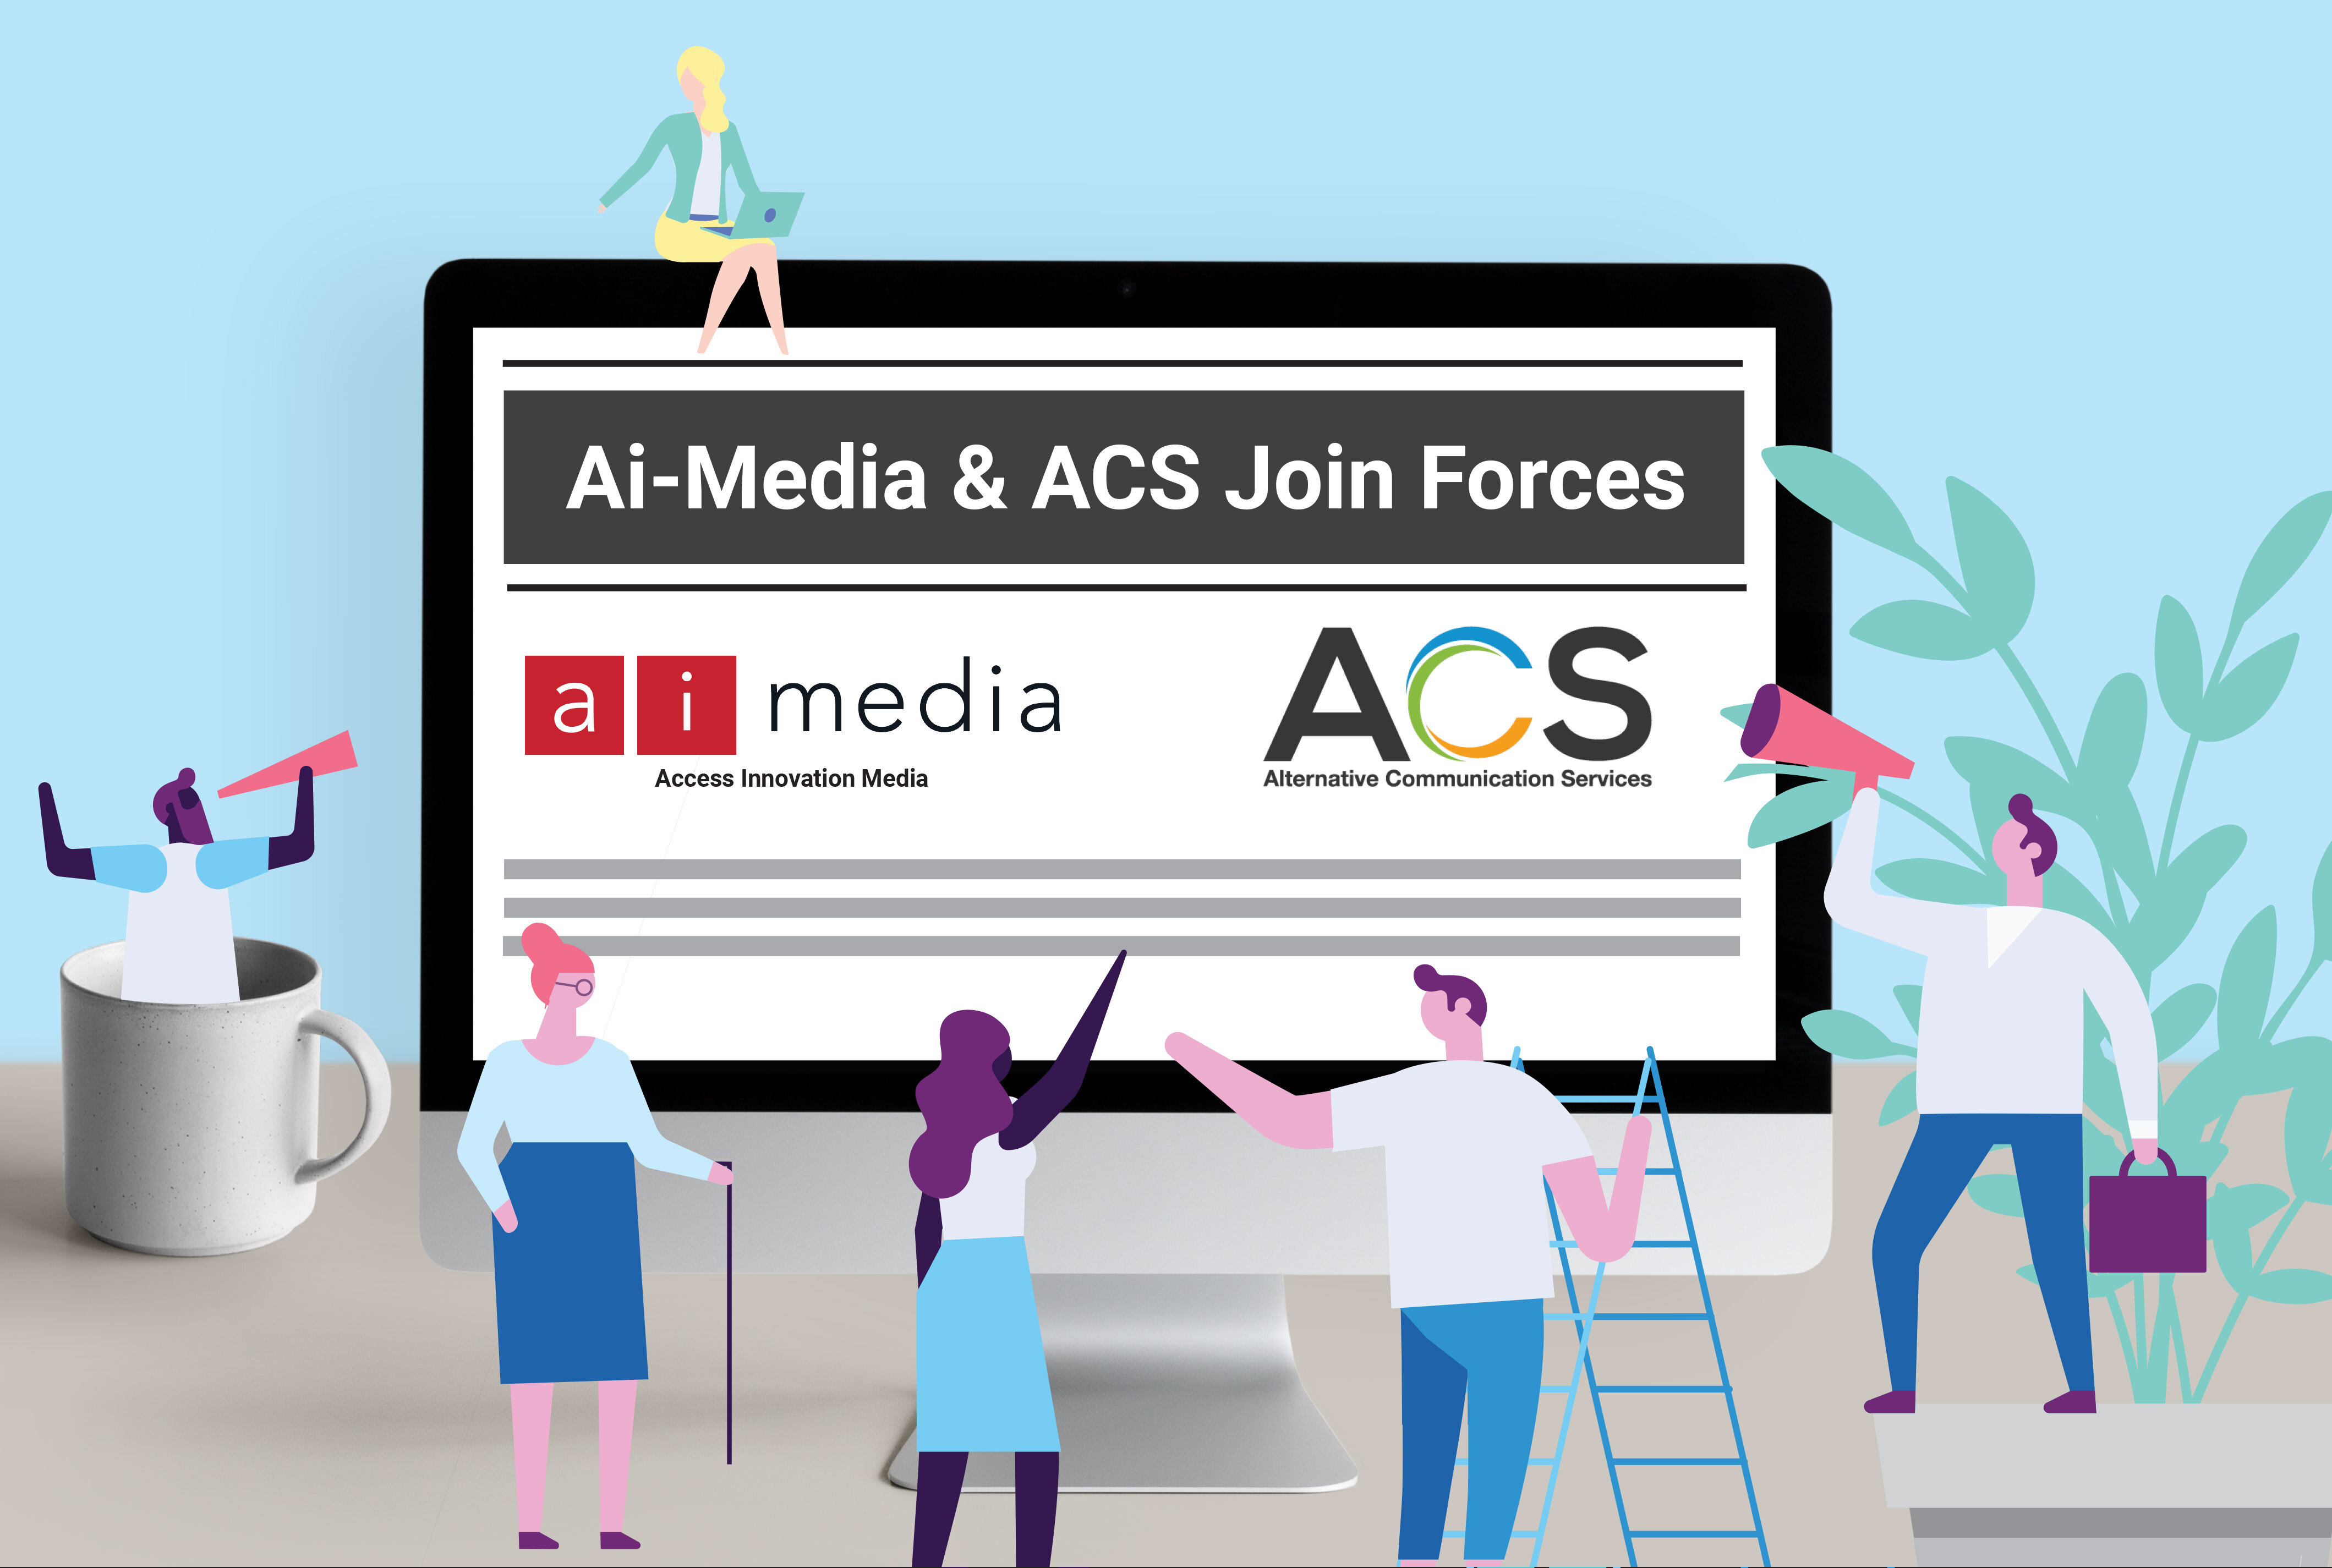 Illustrated image of a computer with a news article open on it. The headlines reads Ái-Media and ACS Join Forces'and it pictures their logos. There are small illustrated people around the computer, some speaking into megaphones and some working and celebrating. There is a plant and a mug on the computer desk.